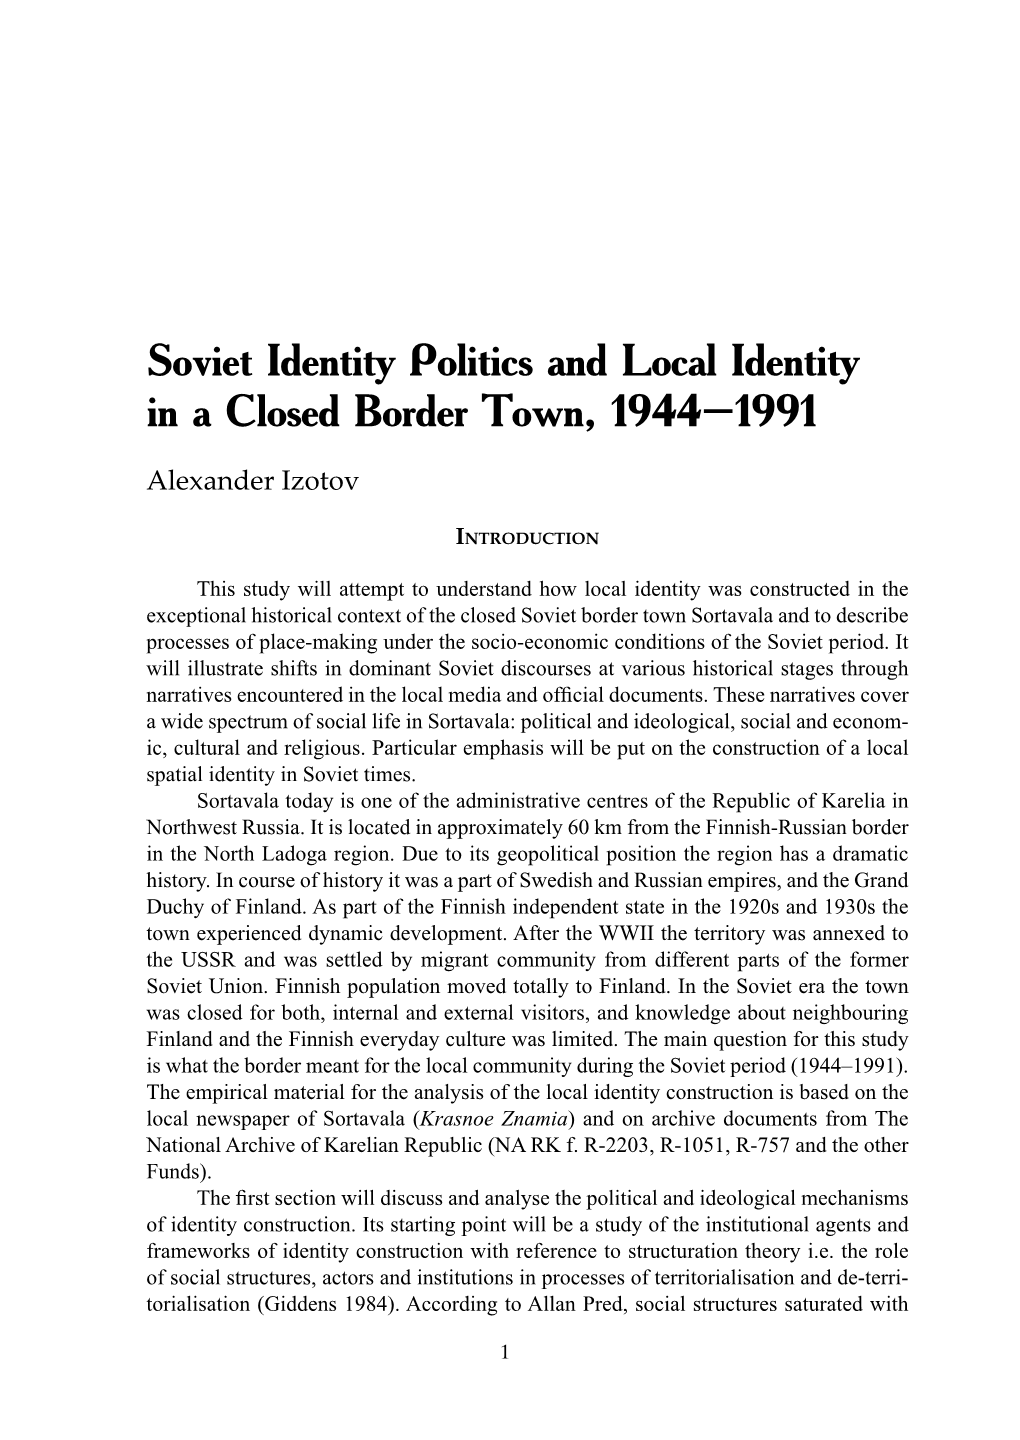 Soviet Identity Politics and Local Identity in a Closed Border Town, 1944–1991